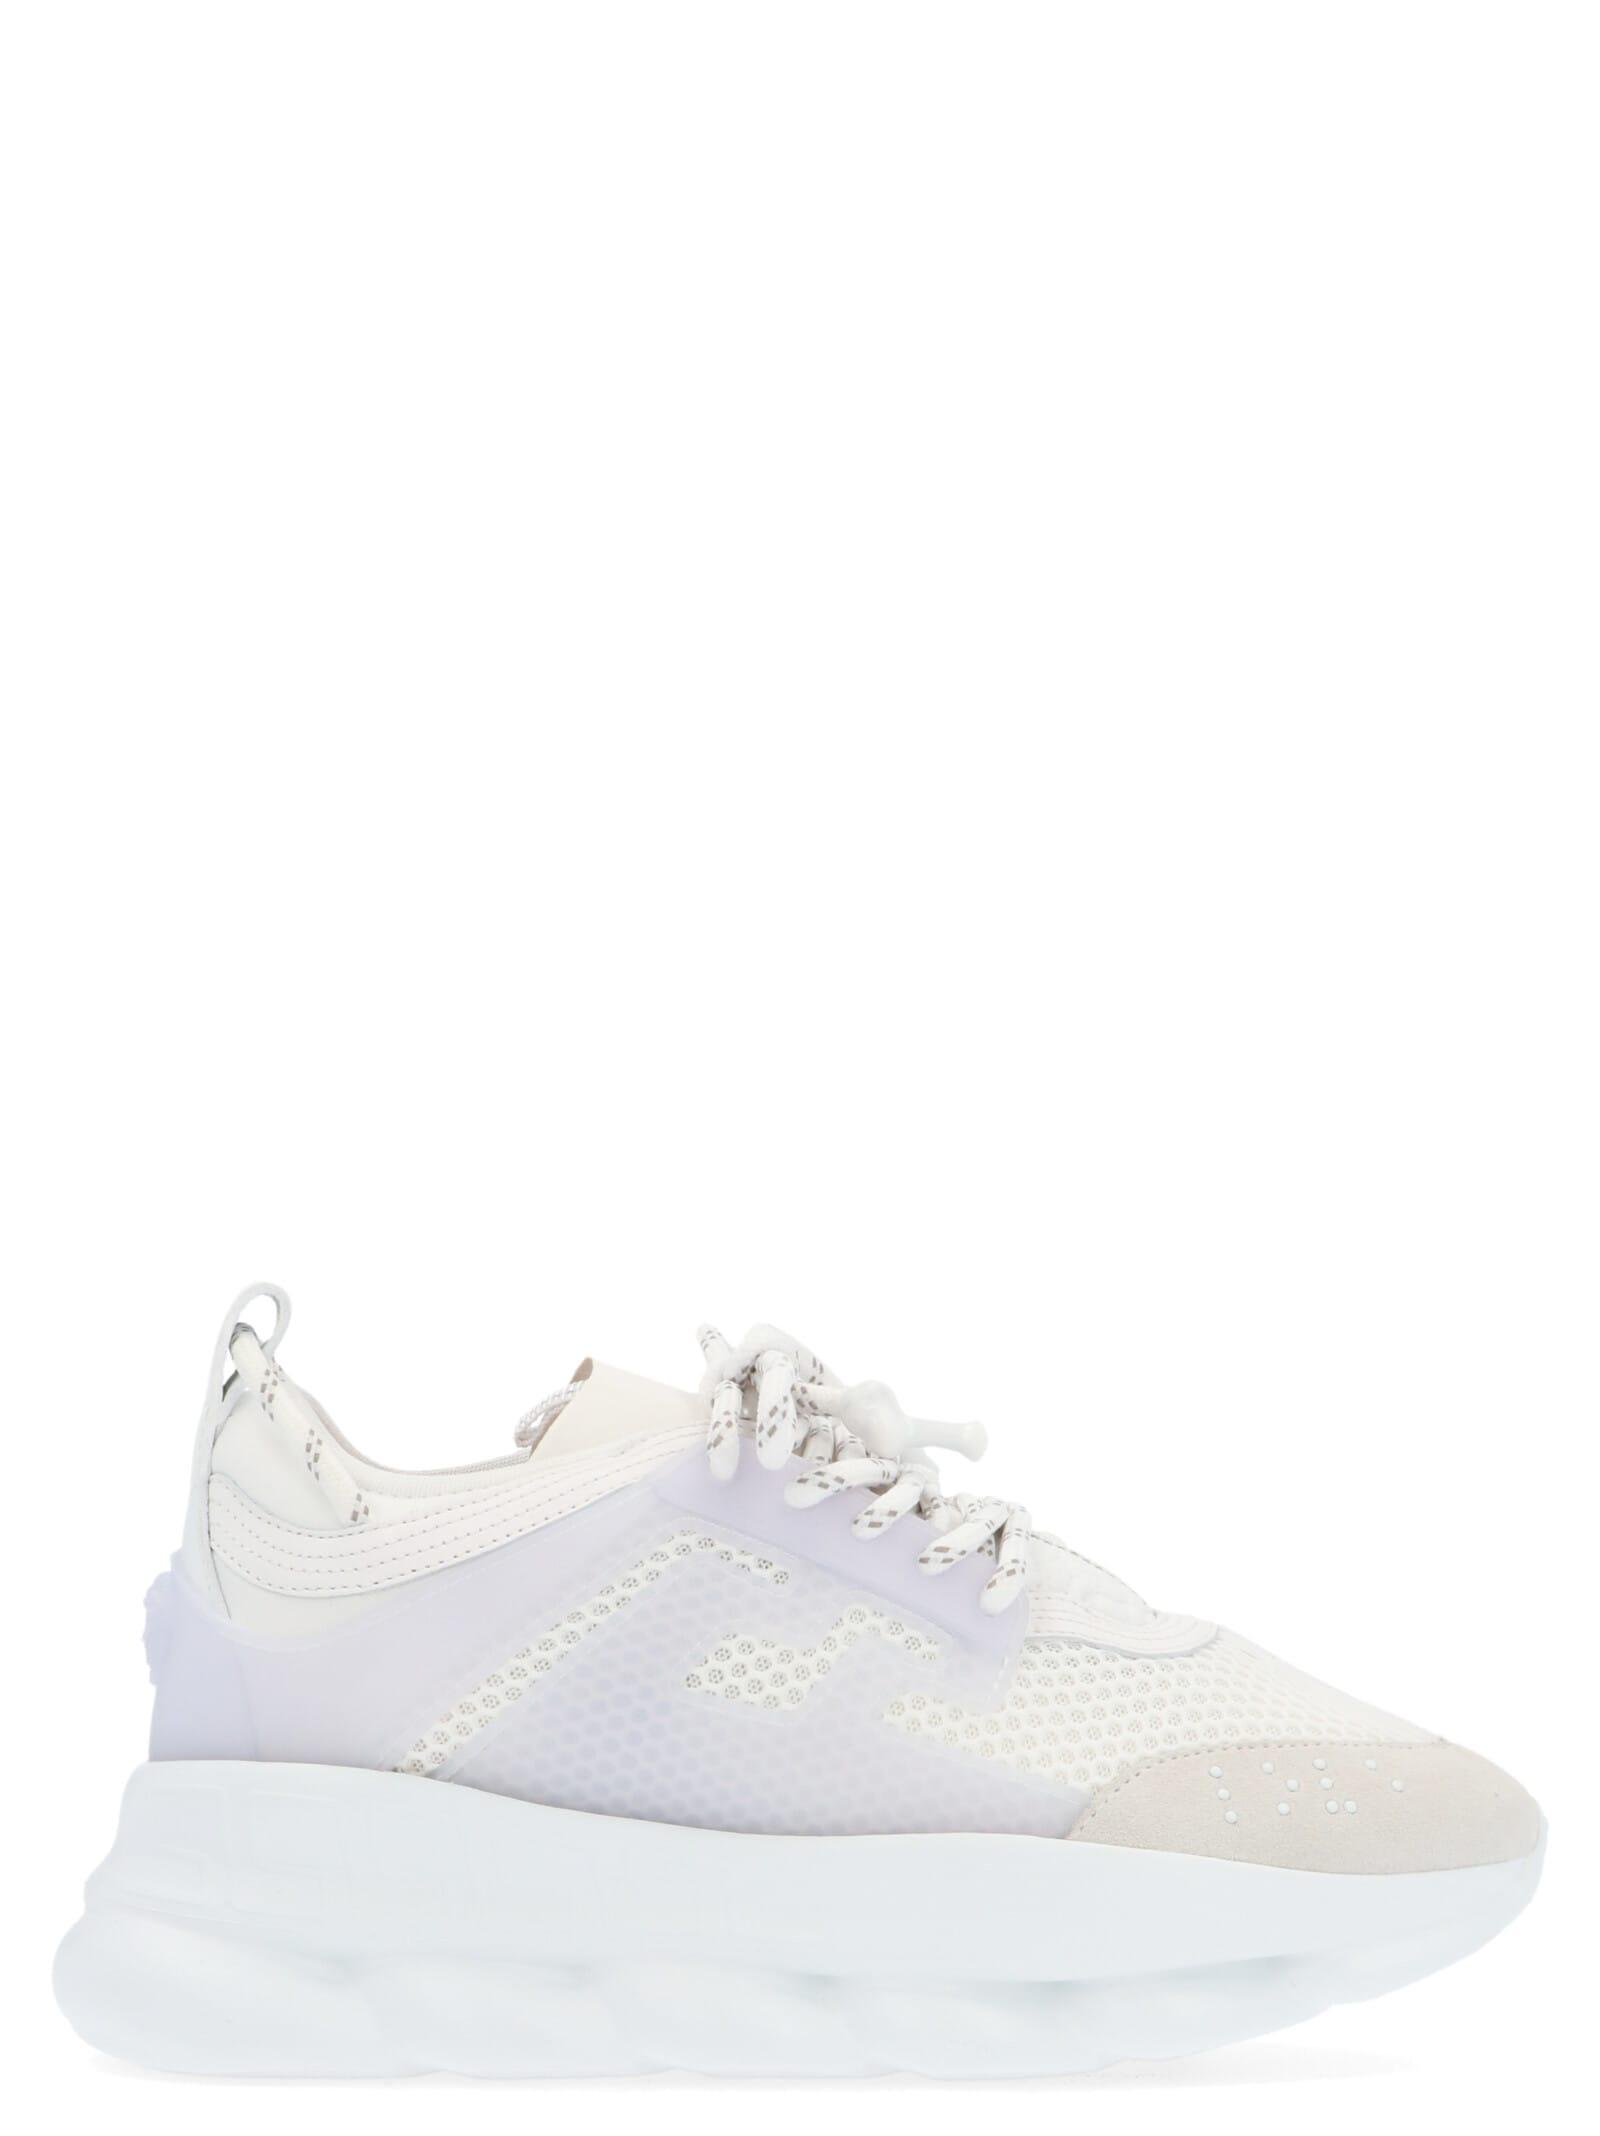 Versace 'chain Reaction' Sneakers in White | Lyst